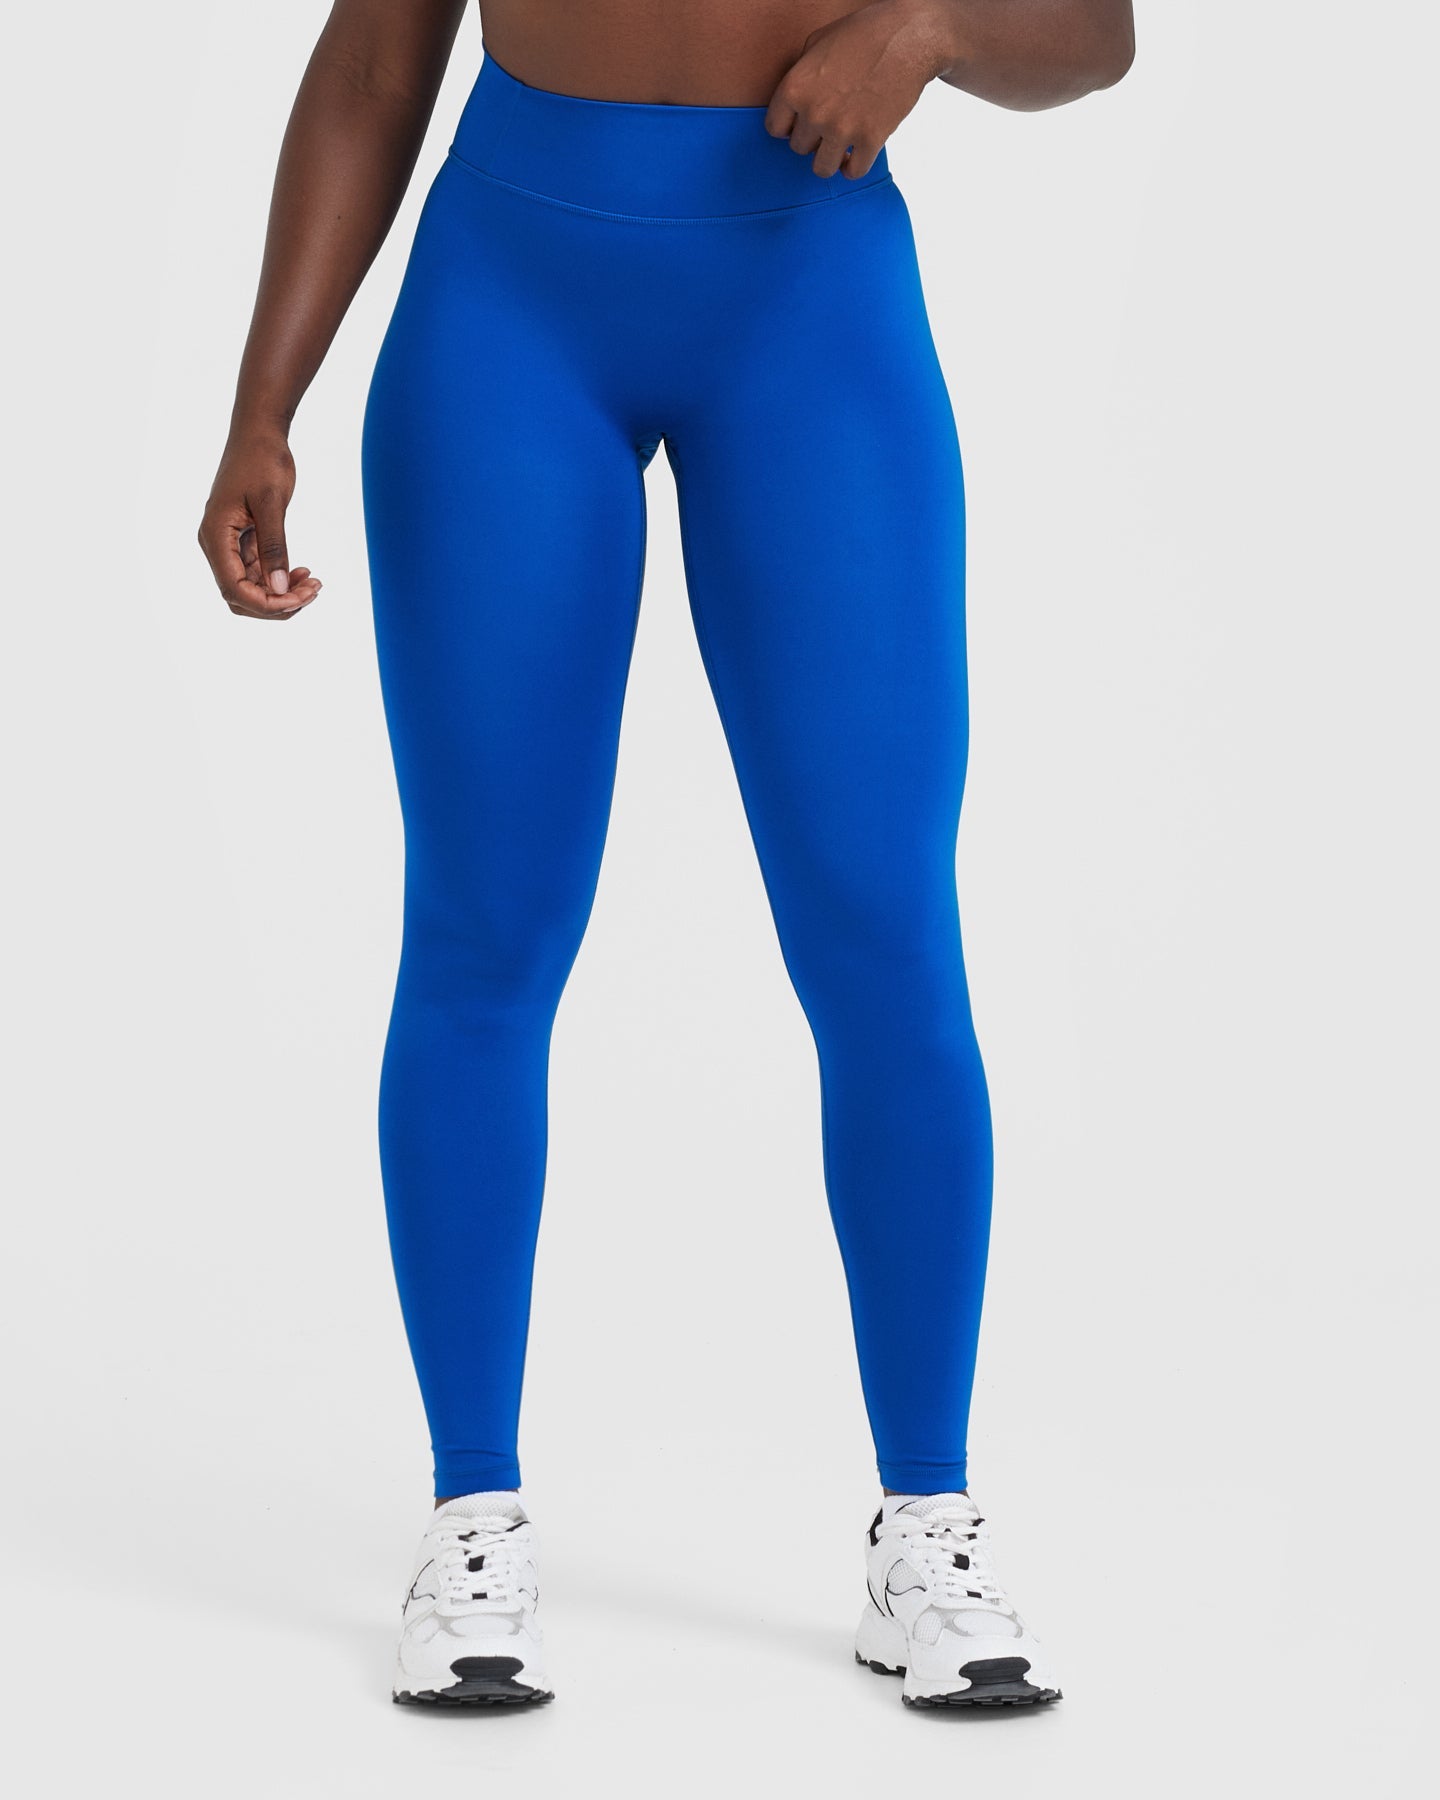 RQYYD Clearance Women High Waisted Ruched Butt Lifting Leggings Scrunch  Textured Compression Yoga Pants Booty Workout Tights(Blue,L) - Walmart.com